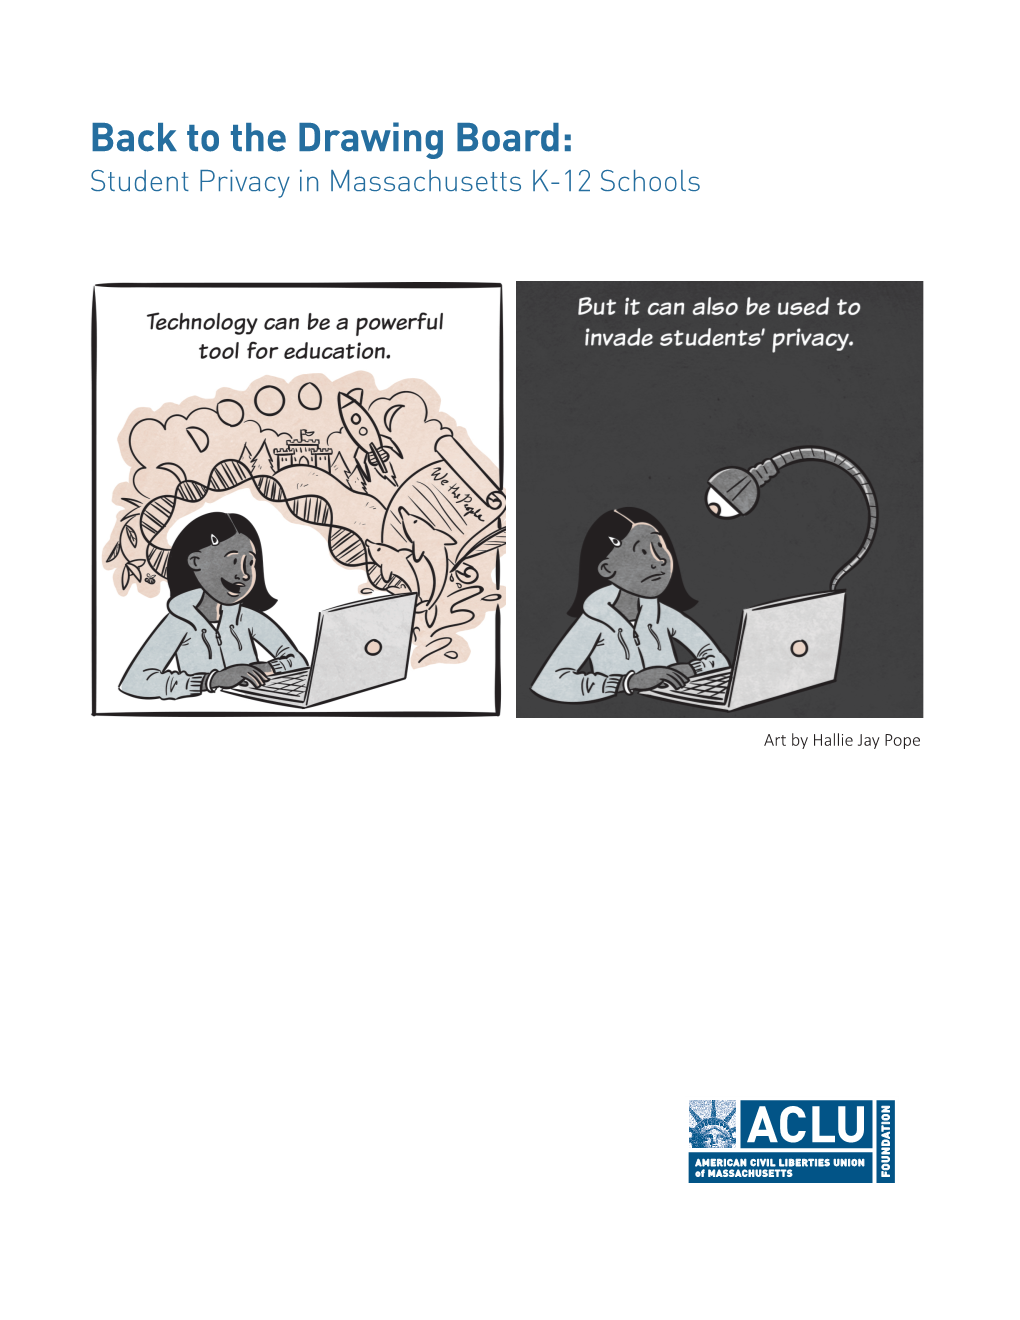 Back to the Drawing Board: Student Privacy in Massachusetts K-12 Schools